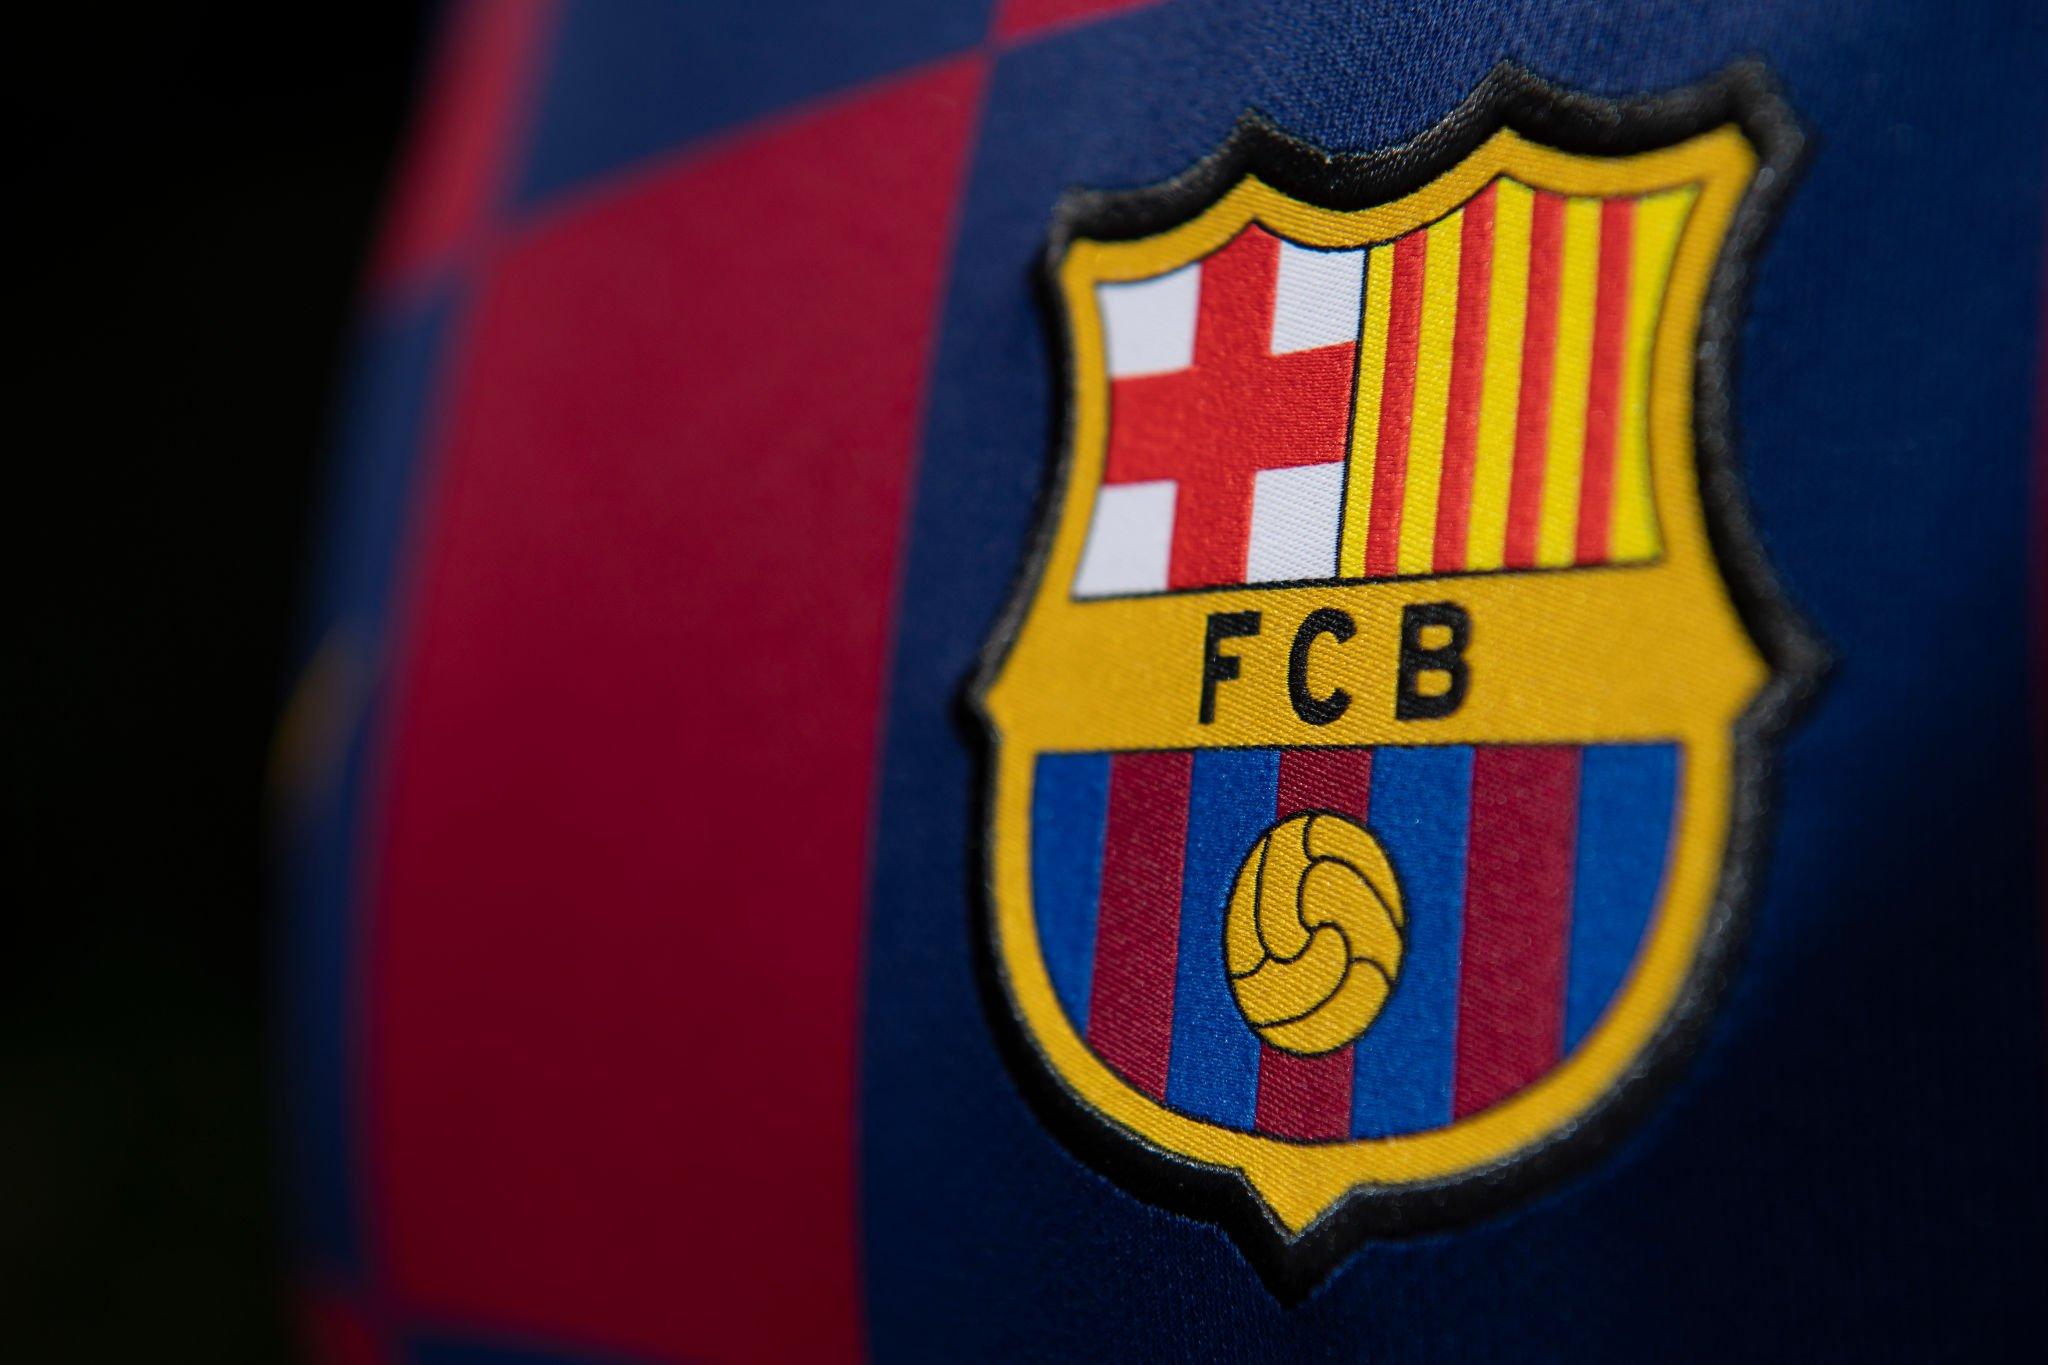 MANCHESTER, ENGLAND - JULY 19: The FC Barcelona club crest on the first team home shirt on July 19, 2020 in Manchester, United Kingdom. (Photo by Visionhaus)